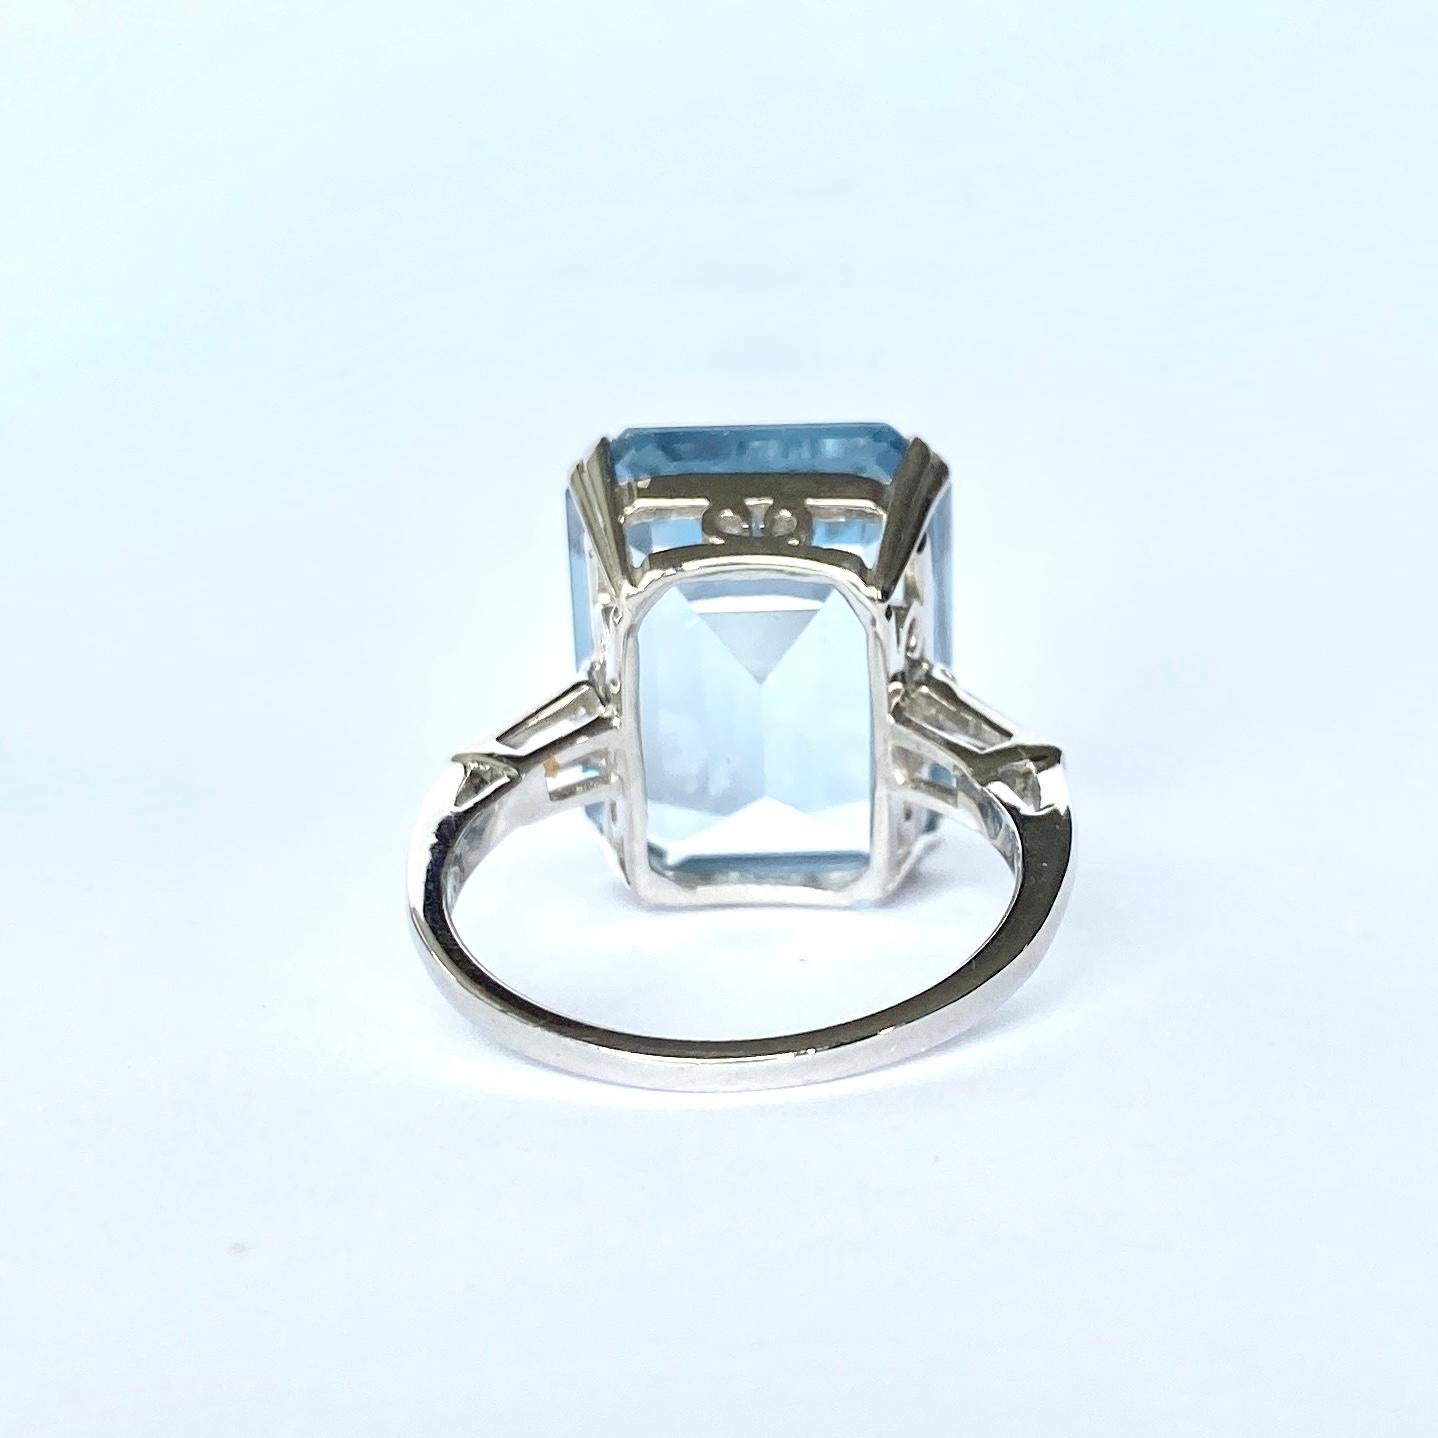 The gorgeous pale blue emerald cut aqua in this cocktail ring is stunning. Either side of the aqua stone are tapered baguette diamonds. The diamond total of the ring Is 30pts and modelled in platinum. 

Ring Size: S 1/2 or 9 1/4 
Stone Dimensions: